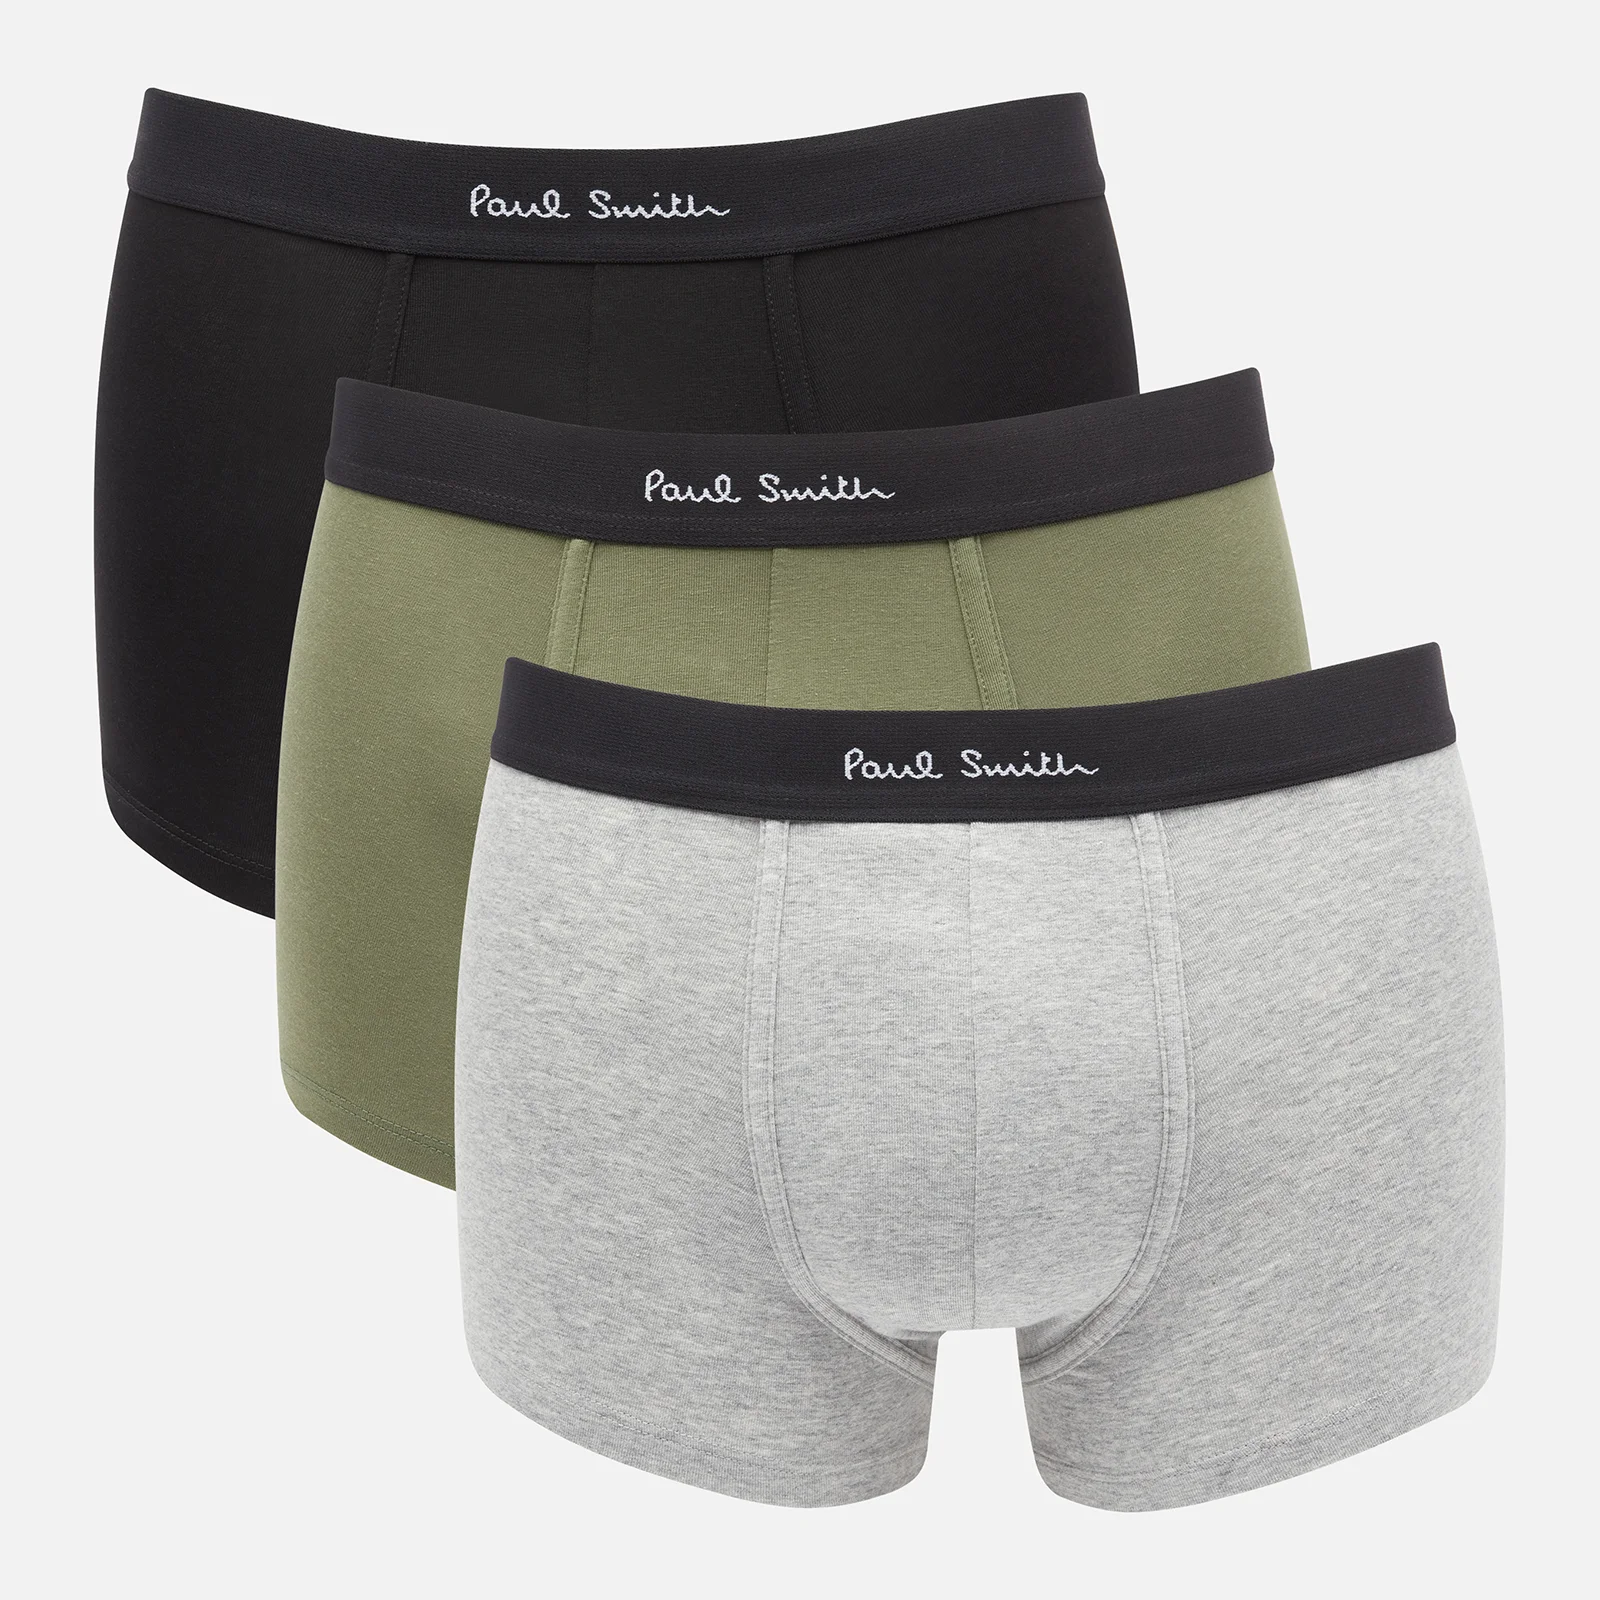 PS Paul Smith Men's 3-Pack Trunk Boxer Shorts - Black/Green/Grey Image 1